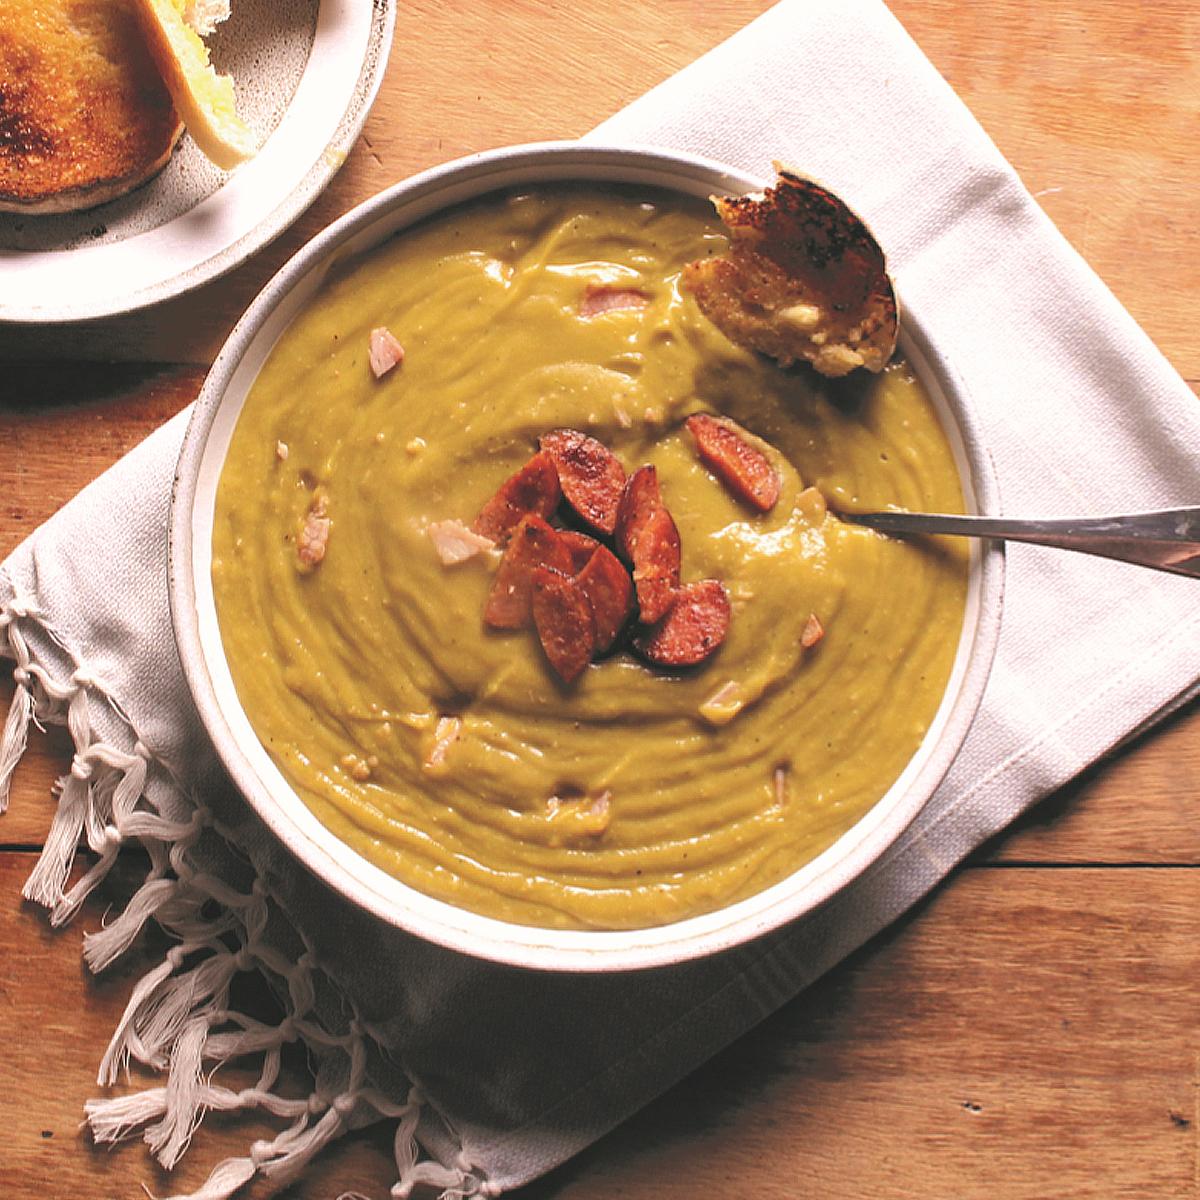 great omas pea and ham soup- Three aussie farmers bacon hock